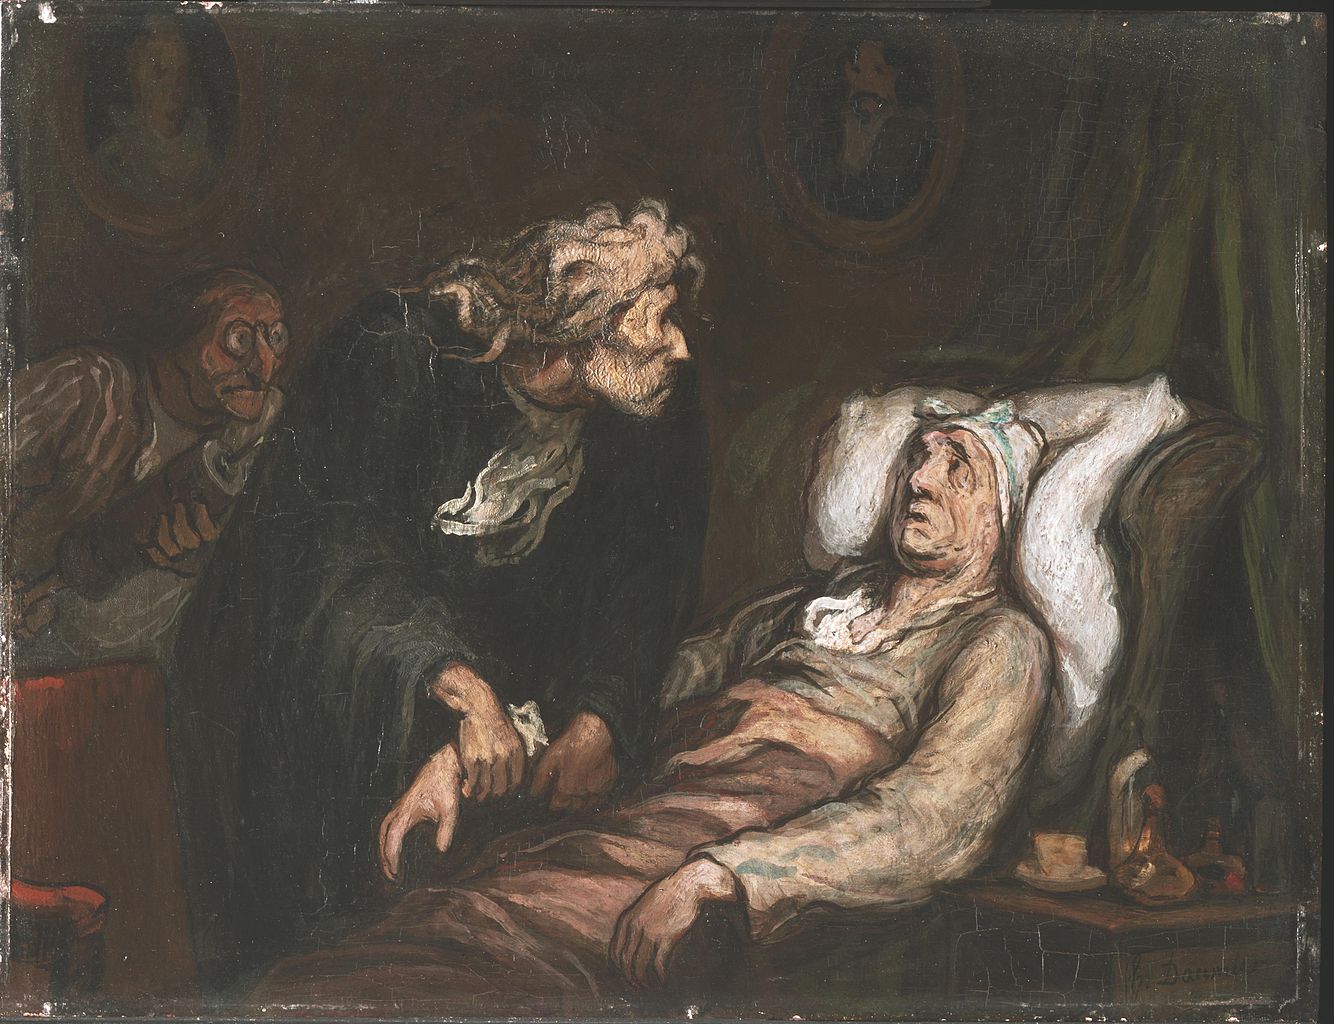 The Imaginary Illness, painting by Honoré Daumier